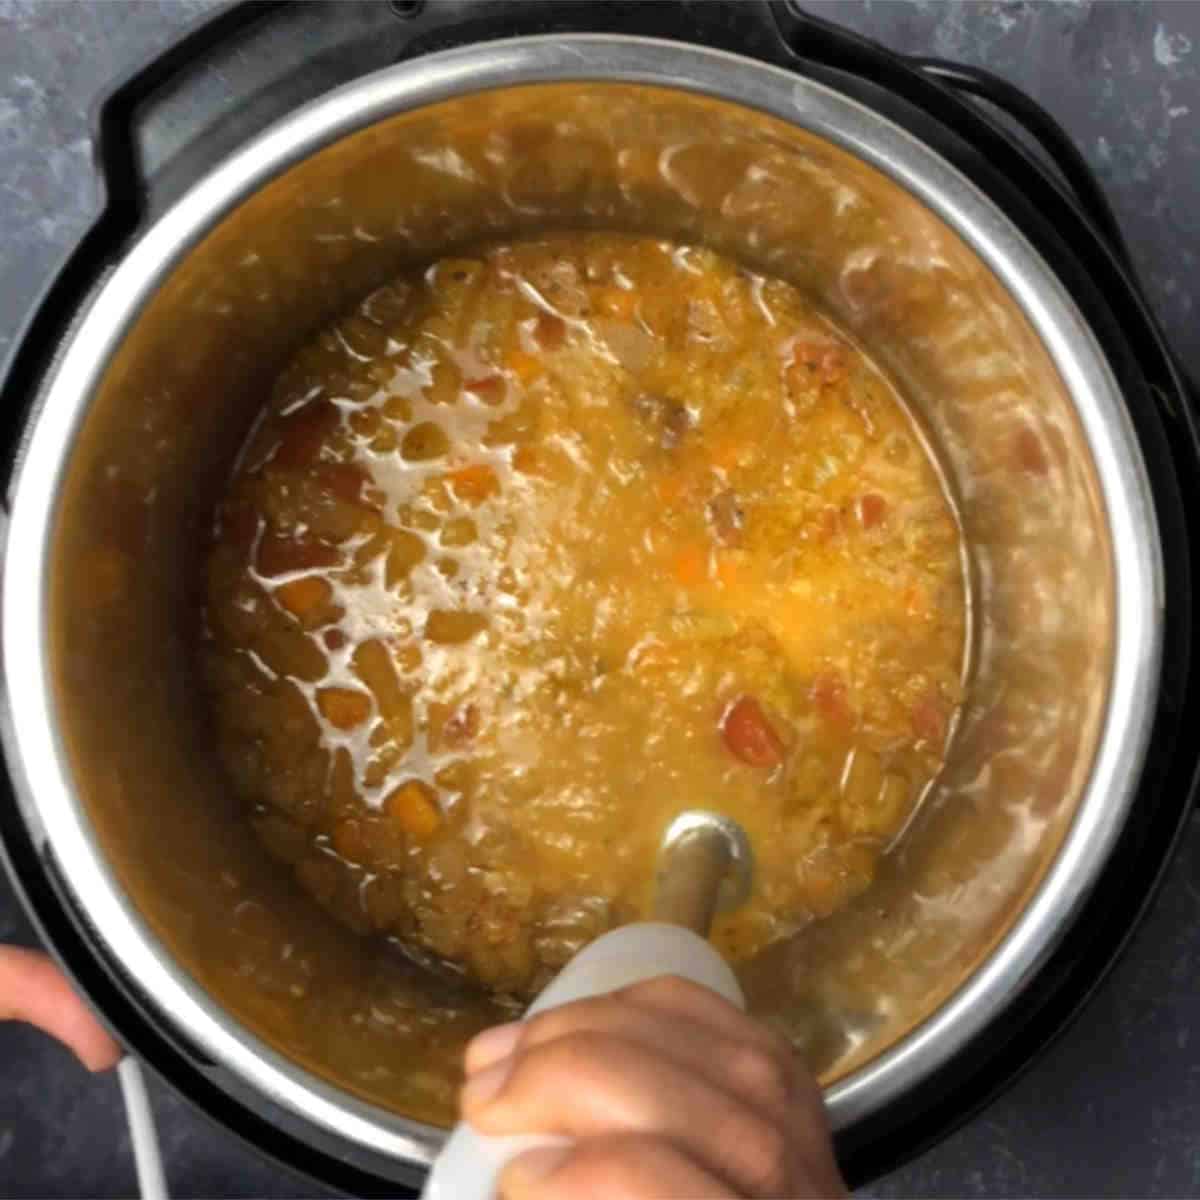 Step showing the blending of soup using an immersion blender.